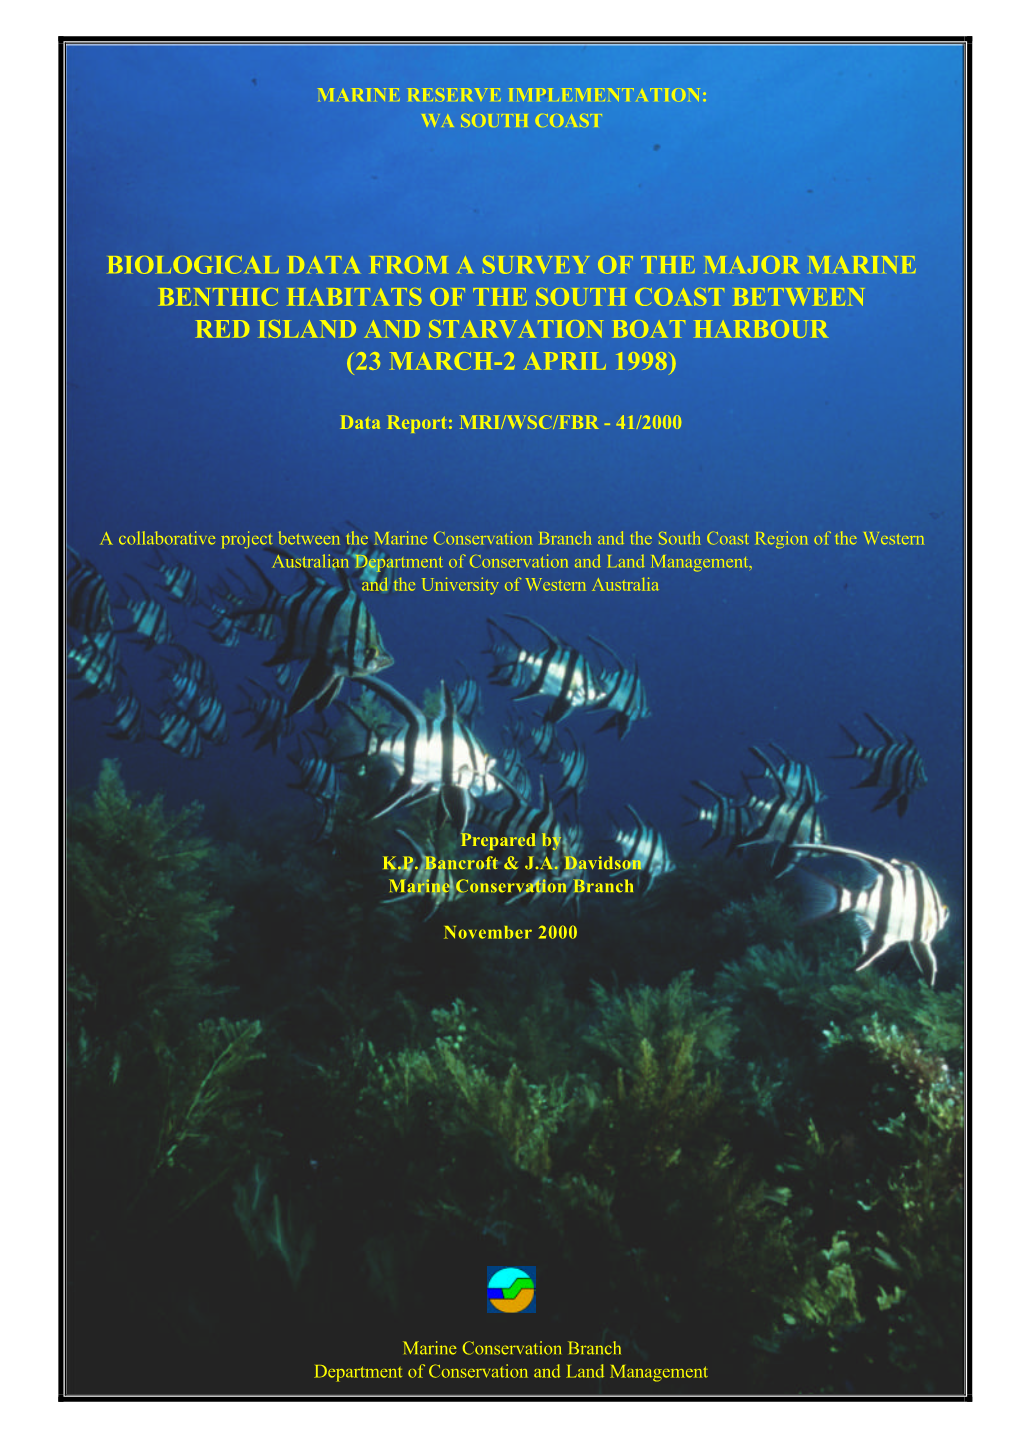 Biological Data from a Survey of the Major Marine Benthic Habitats of the South Coast Between Red Island and Starvation Boat Harbour (23 March-2 April 1998)